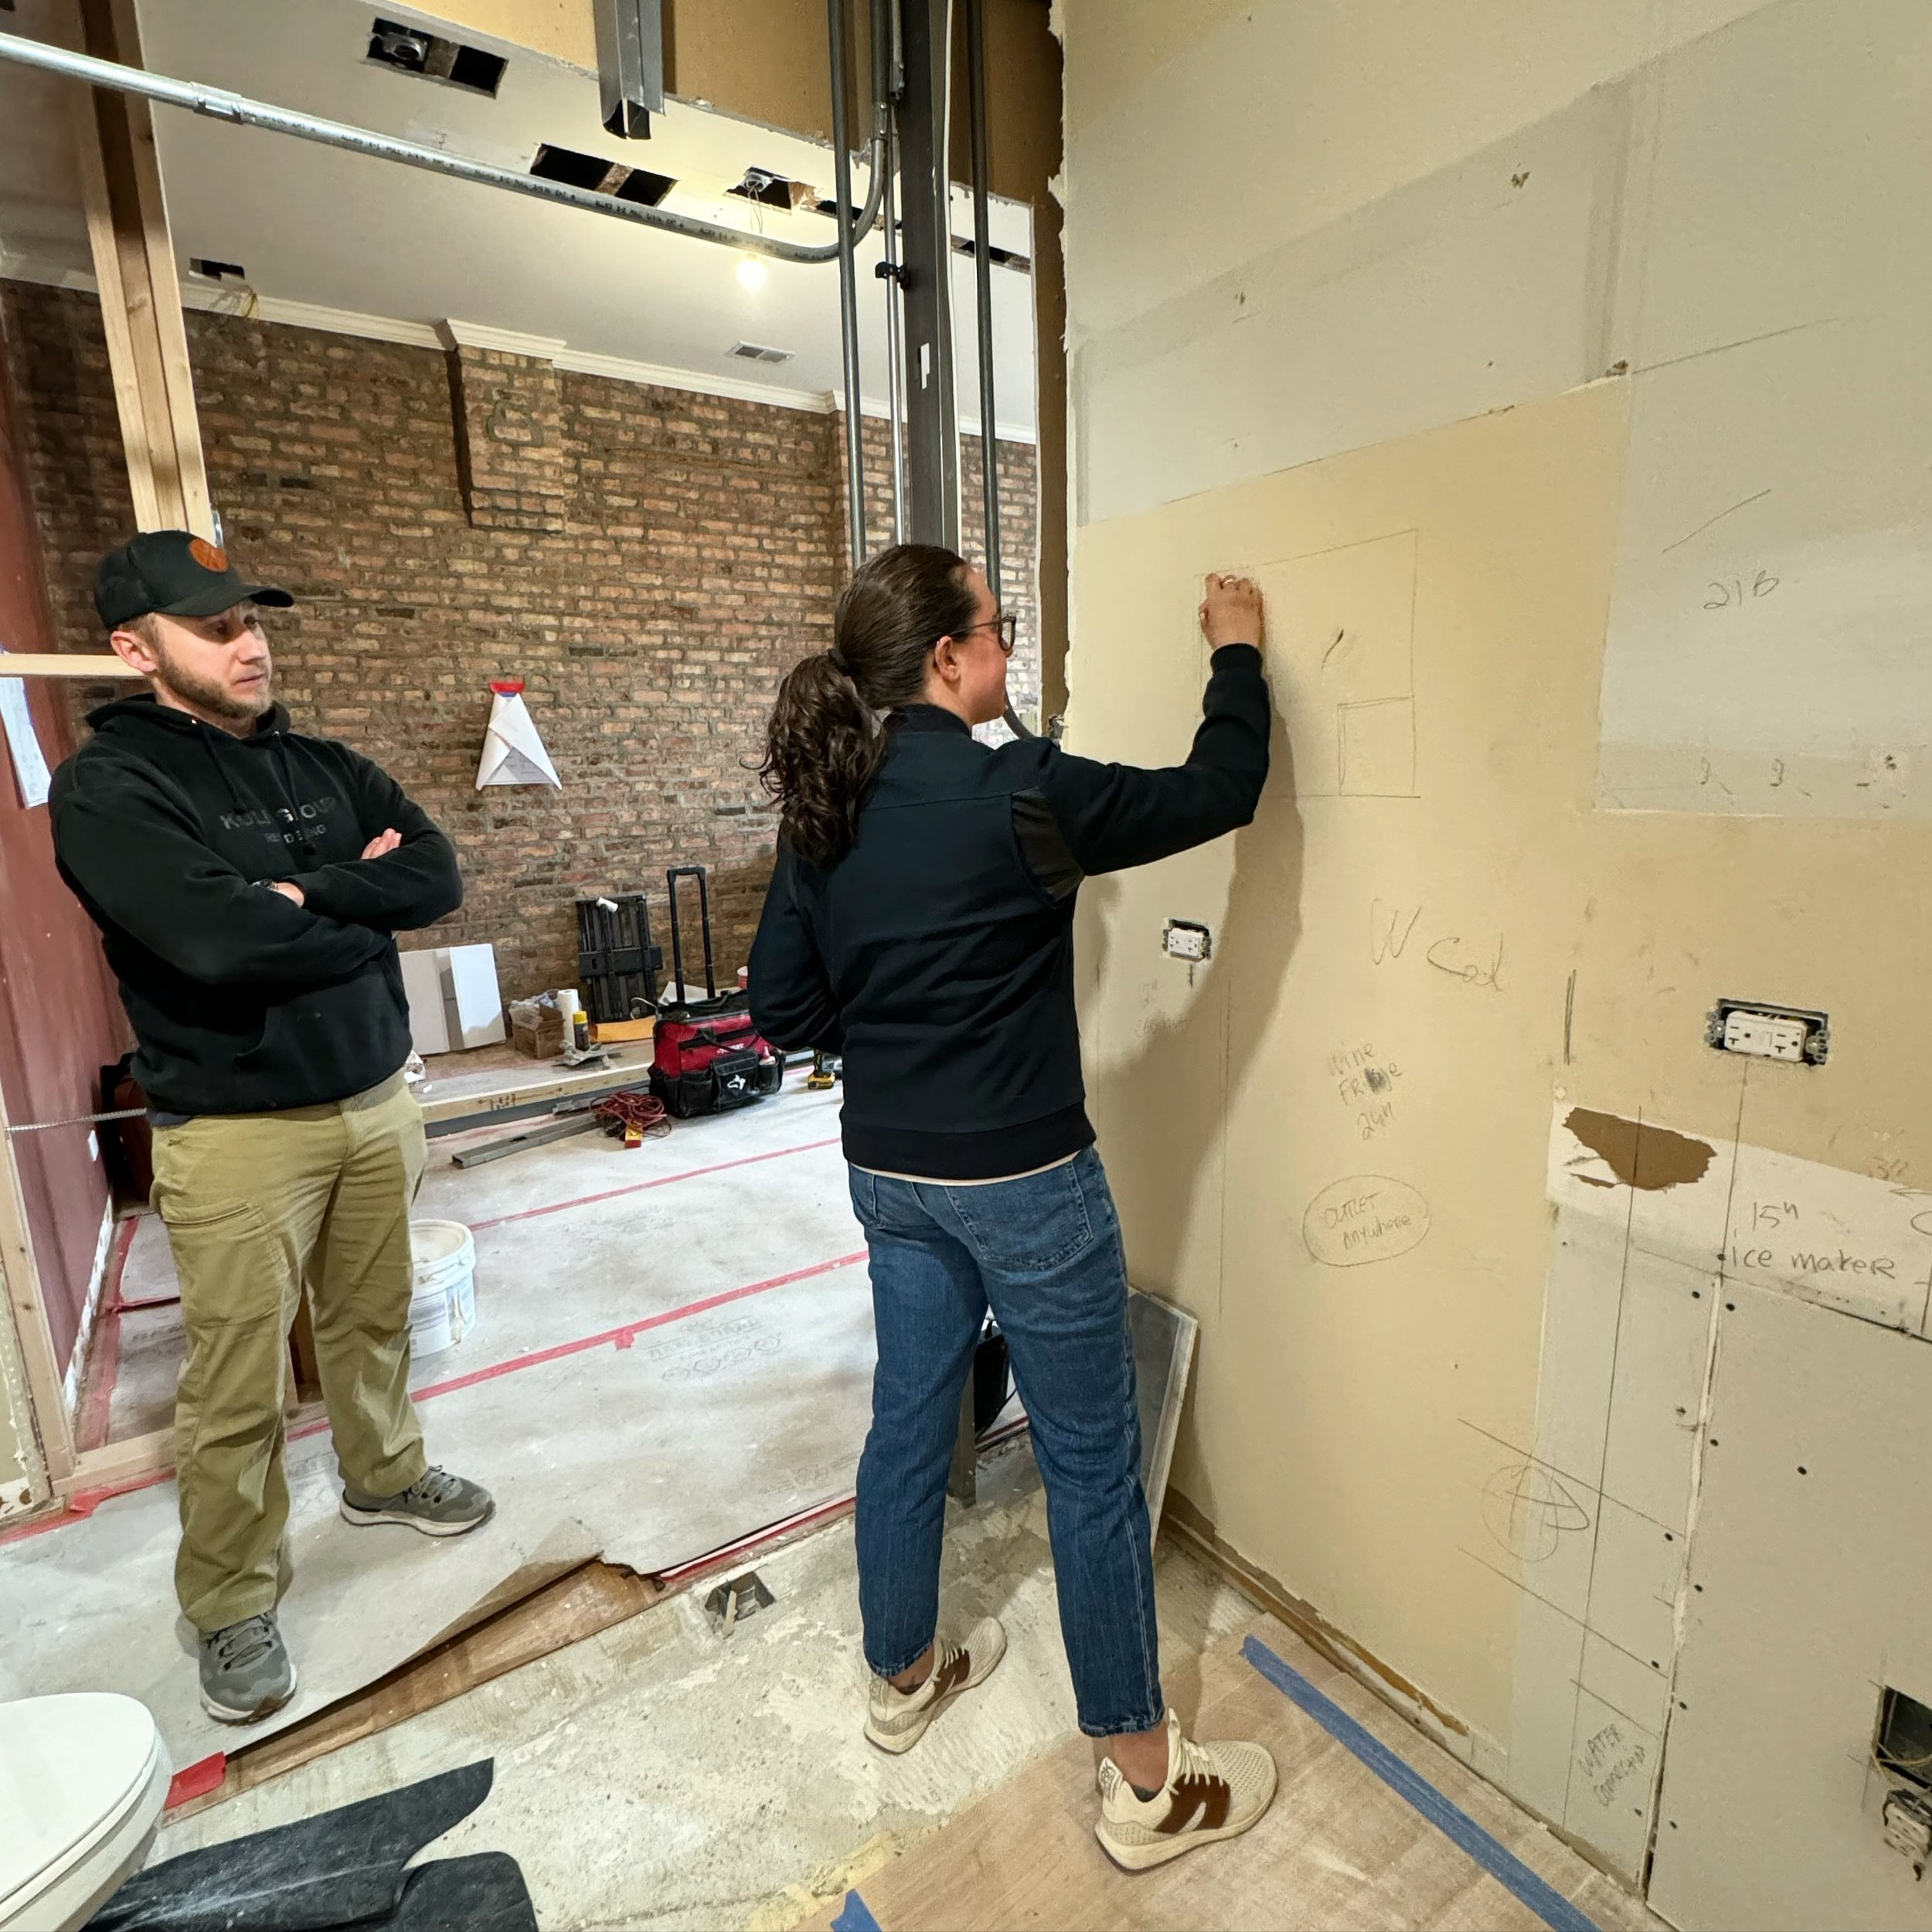 Unpopular Opinion: One of my favorite things about remodeling is the unknown. 🫣

This might sound crazy, because the &lsquo;unknown&rsquo; is typically the scariest part of the process. But here at GG, we thrive in developing creative solutions to s